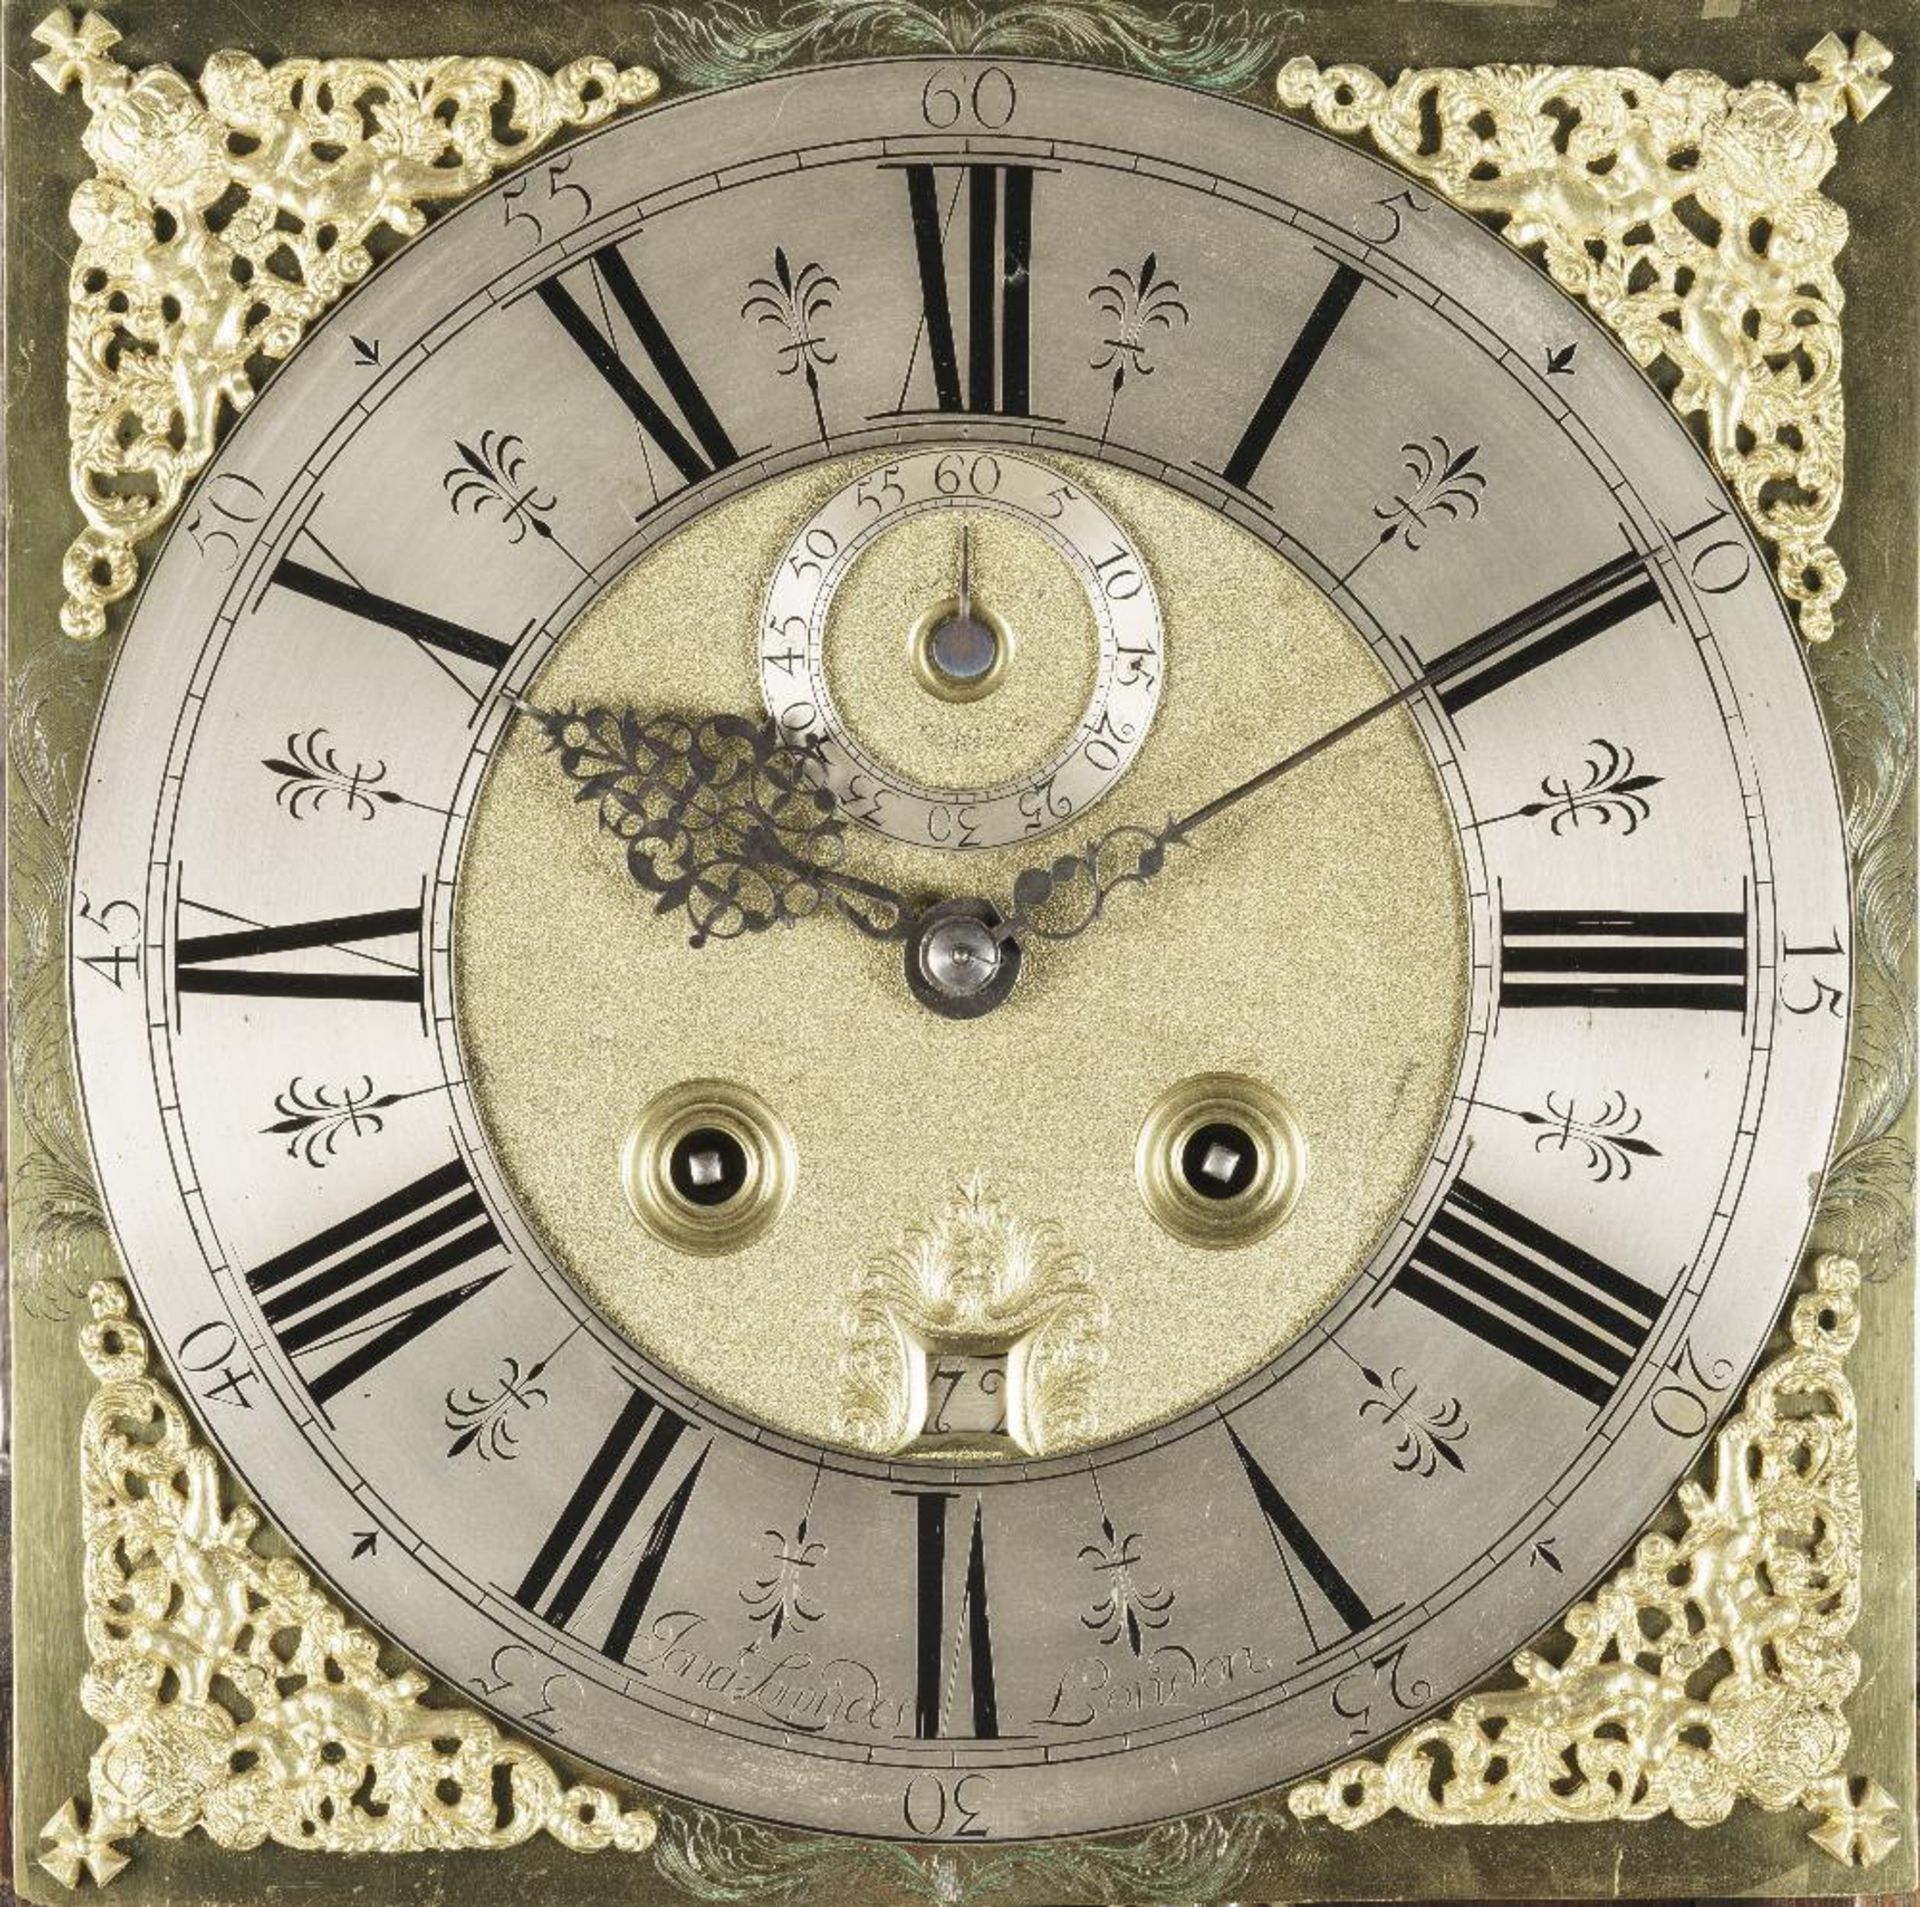 A MONTH-GOING WALNUT AND SEAWEED MARQUETRY LONGCASE CLOCK Jonathan Lowndes, London, circa 1710 - Image 2 of 2